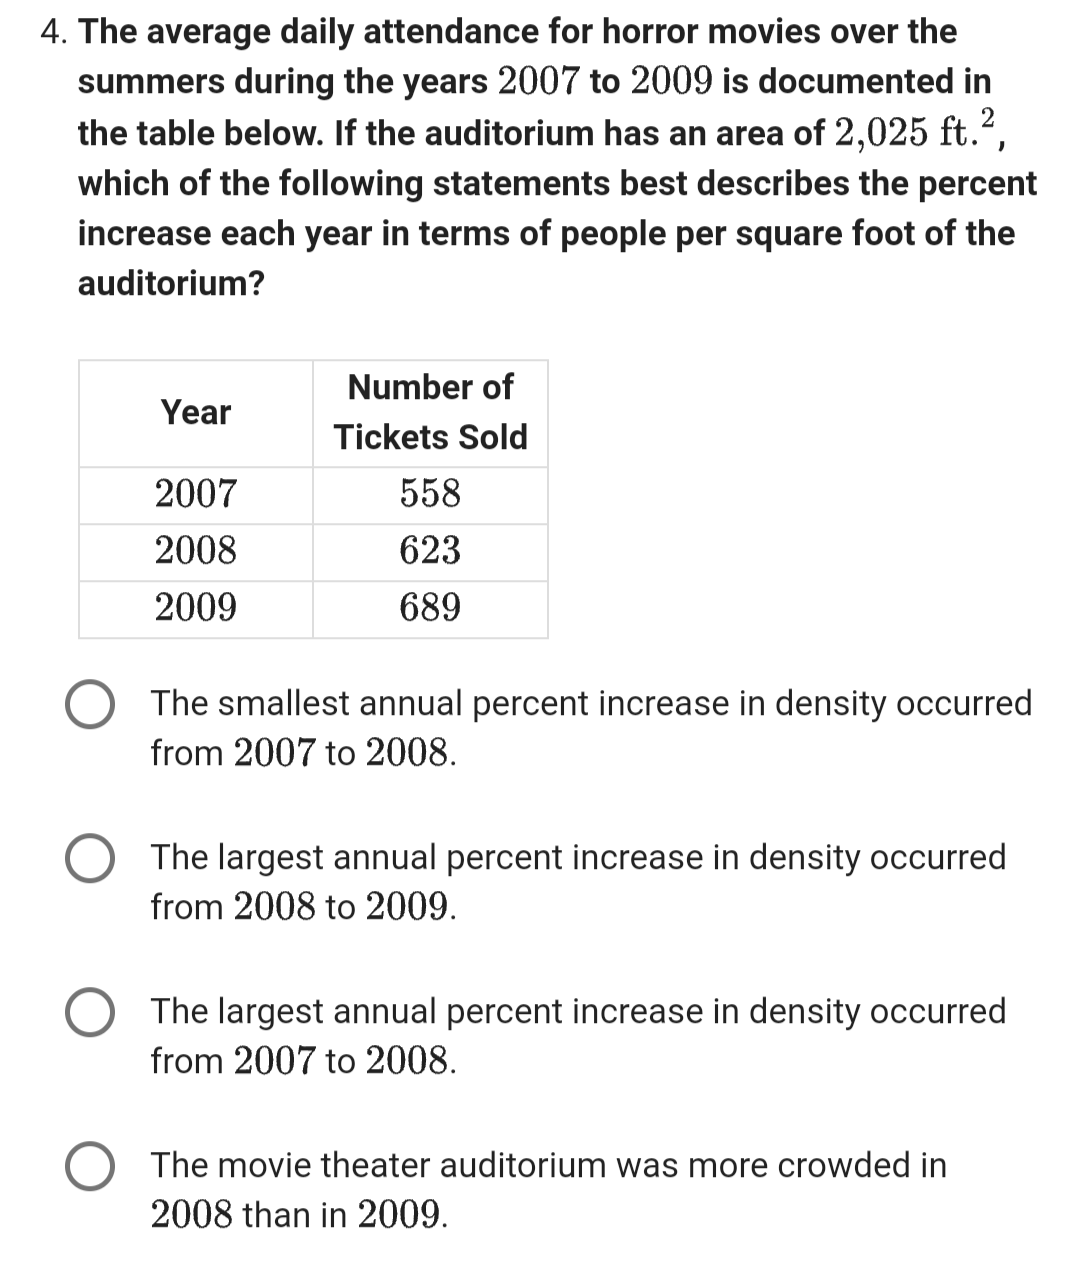 4. The average daily attendance for horror movies over the
summers during the years 2007 to 2009 is documented in
the table below. If the auditorium has an area of 2,025 ft.²,
which of the following statements best describes the percent
increase each year in terms of people per square foot of the
auditorium?
Year
2007
2008
2009
Number of
Tickets Sold
558
623
689
The smallest annual percent increase in density occurred
from 2007 to 2008.
The largest annual percent increase in density occurred
from 2008 to 2009.
The largest annual percent increase in density occurred
from 2007 to 2008.
The movie theater auditorium was more crowded in
2008 than in 2009.